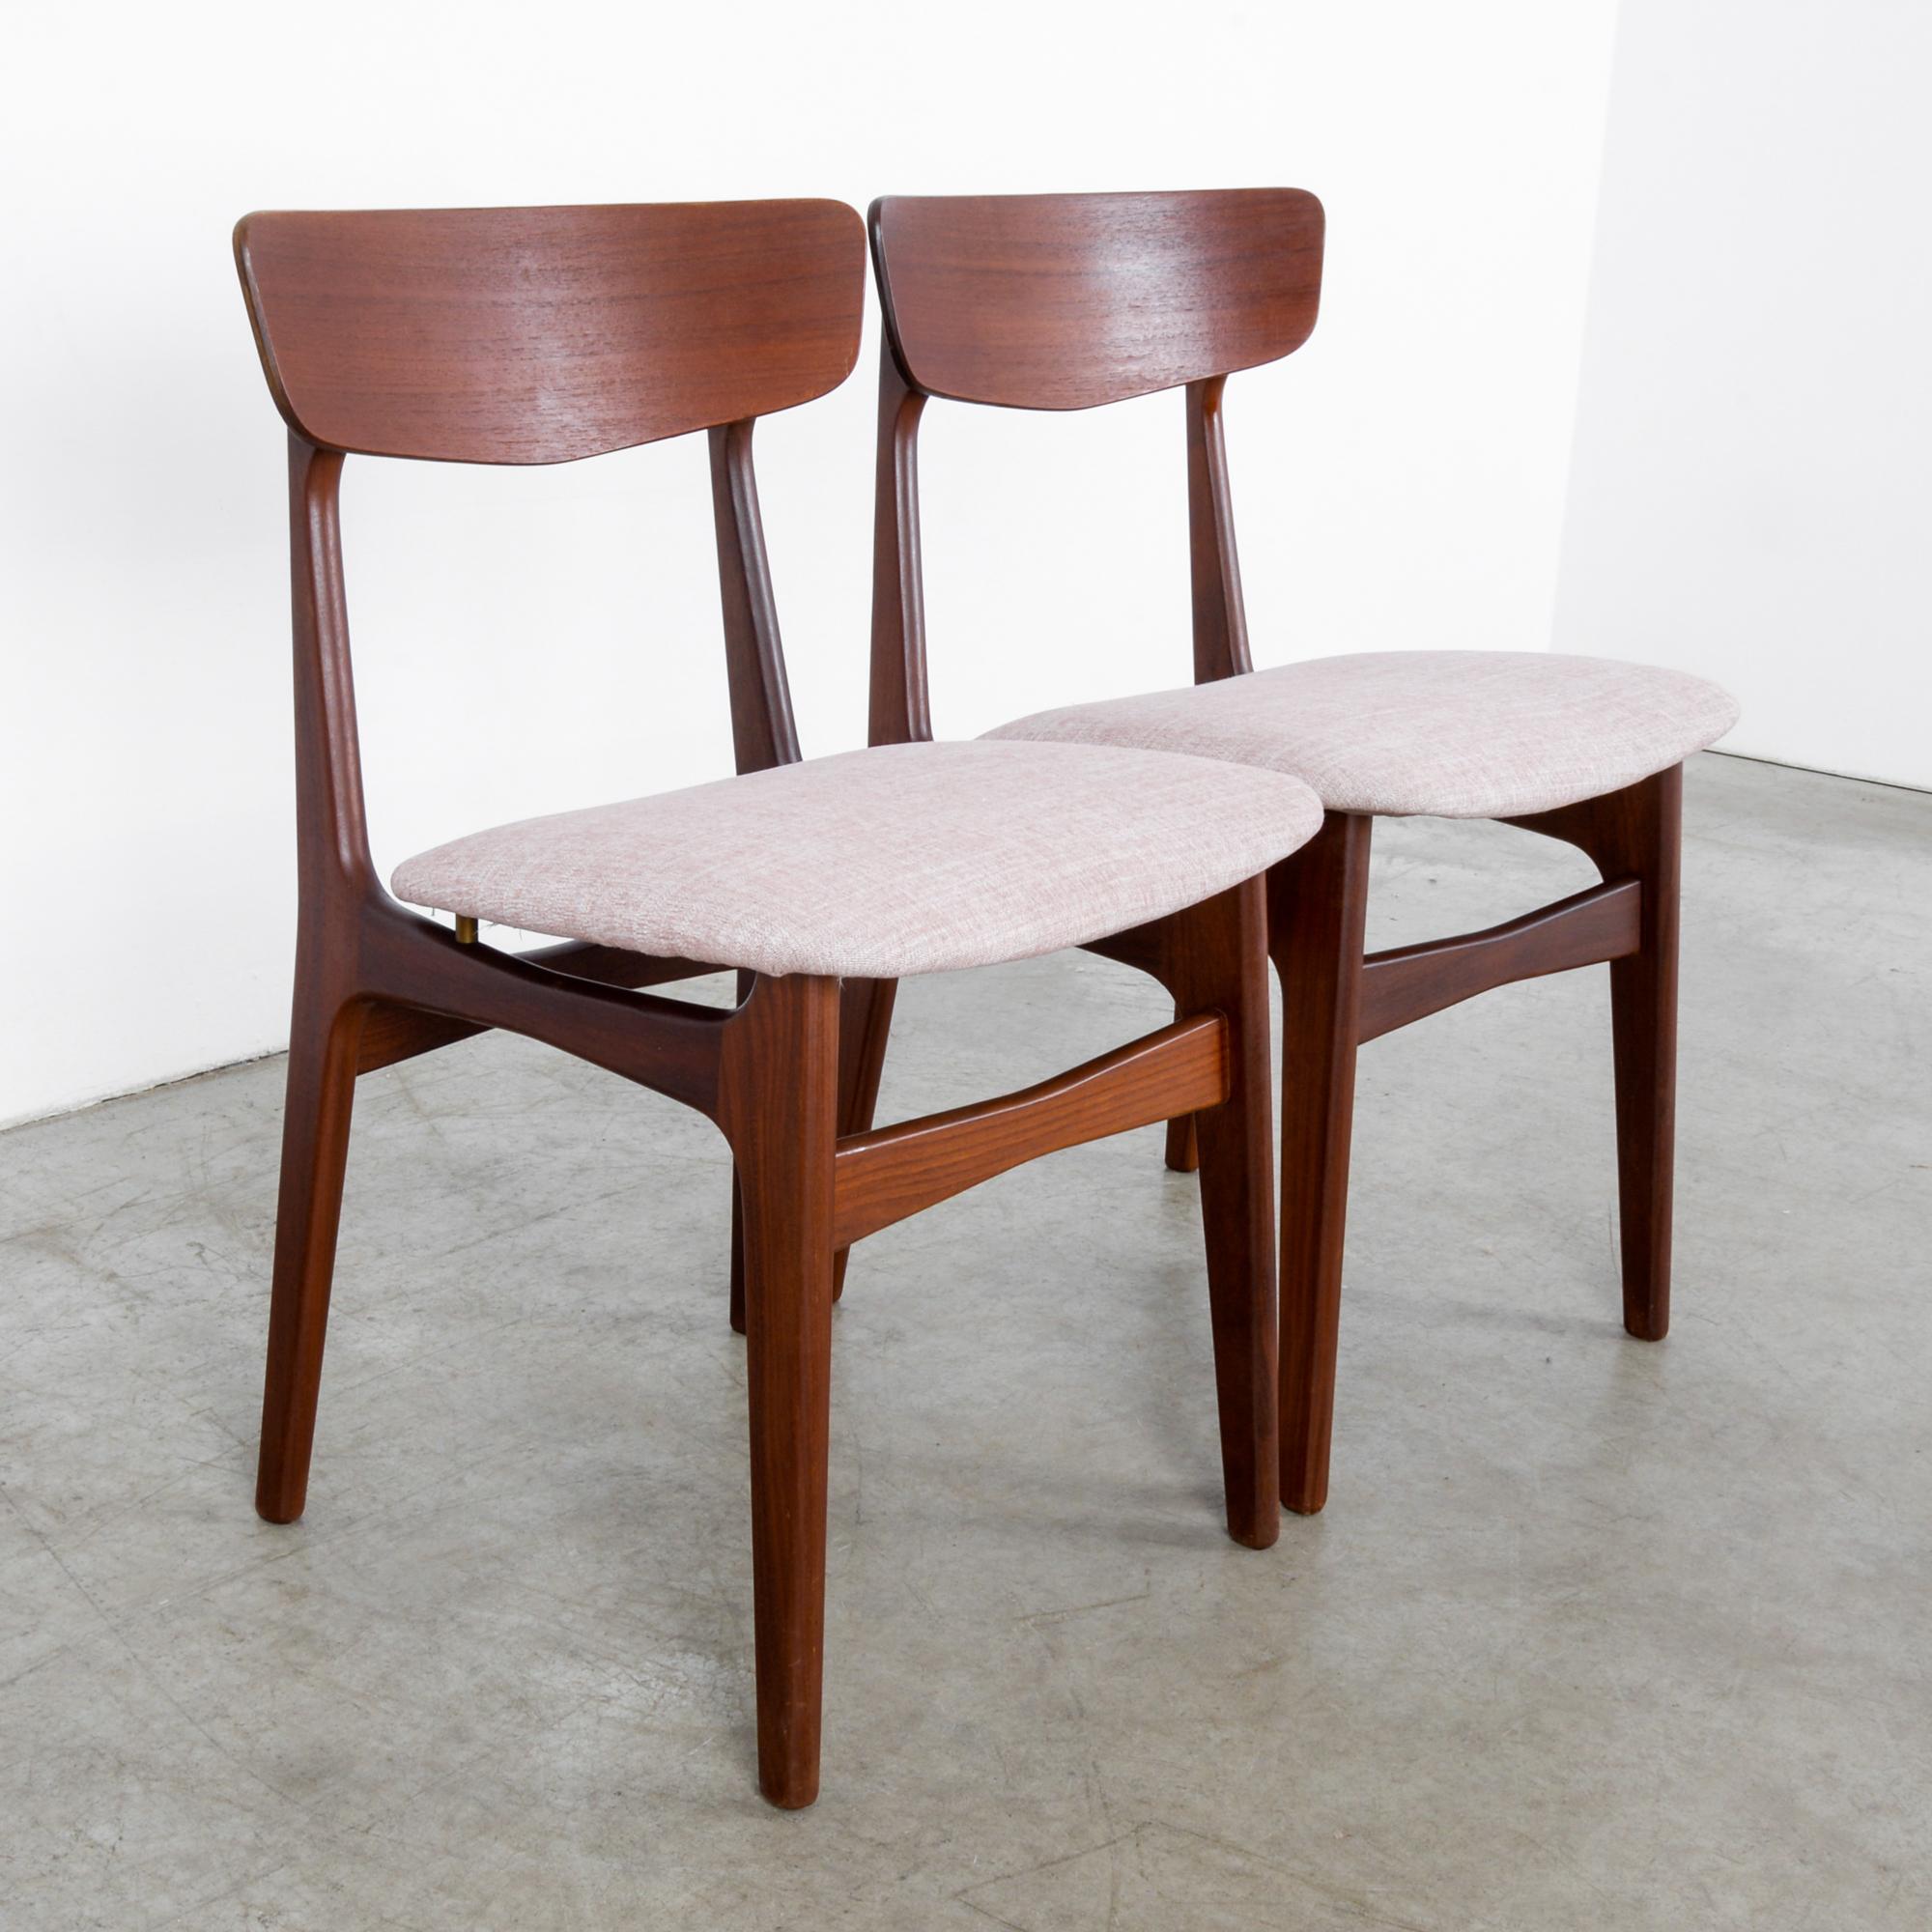 Mid-20th Century 1960s Danish Teak Chairs by Glostrup, a Pair